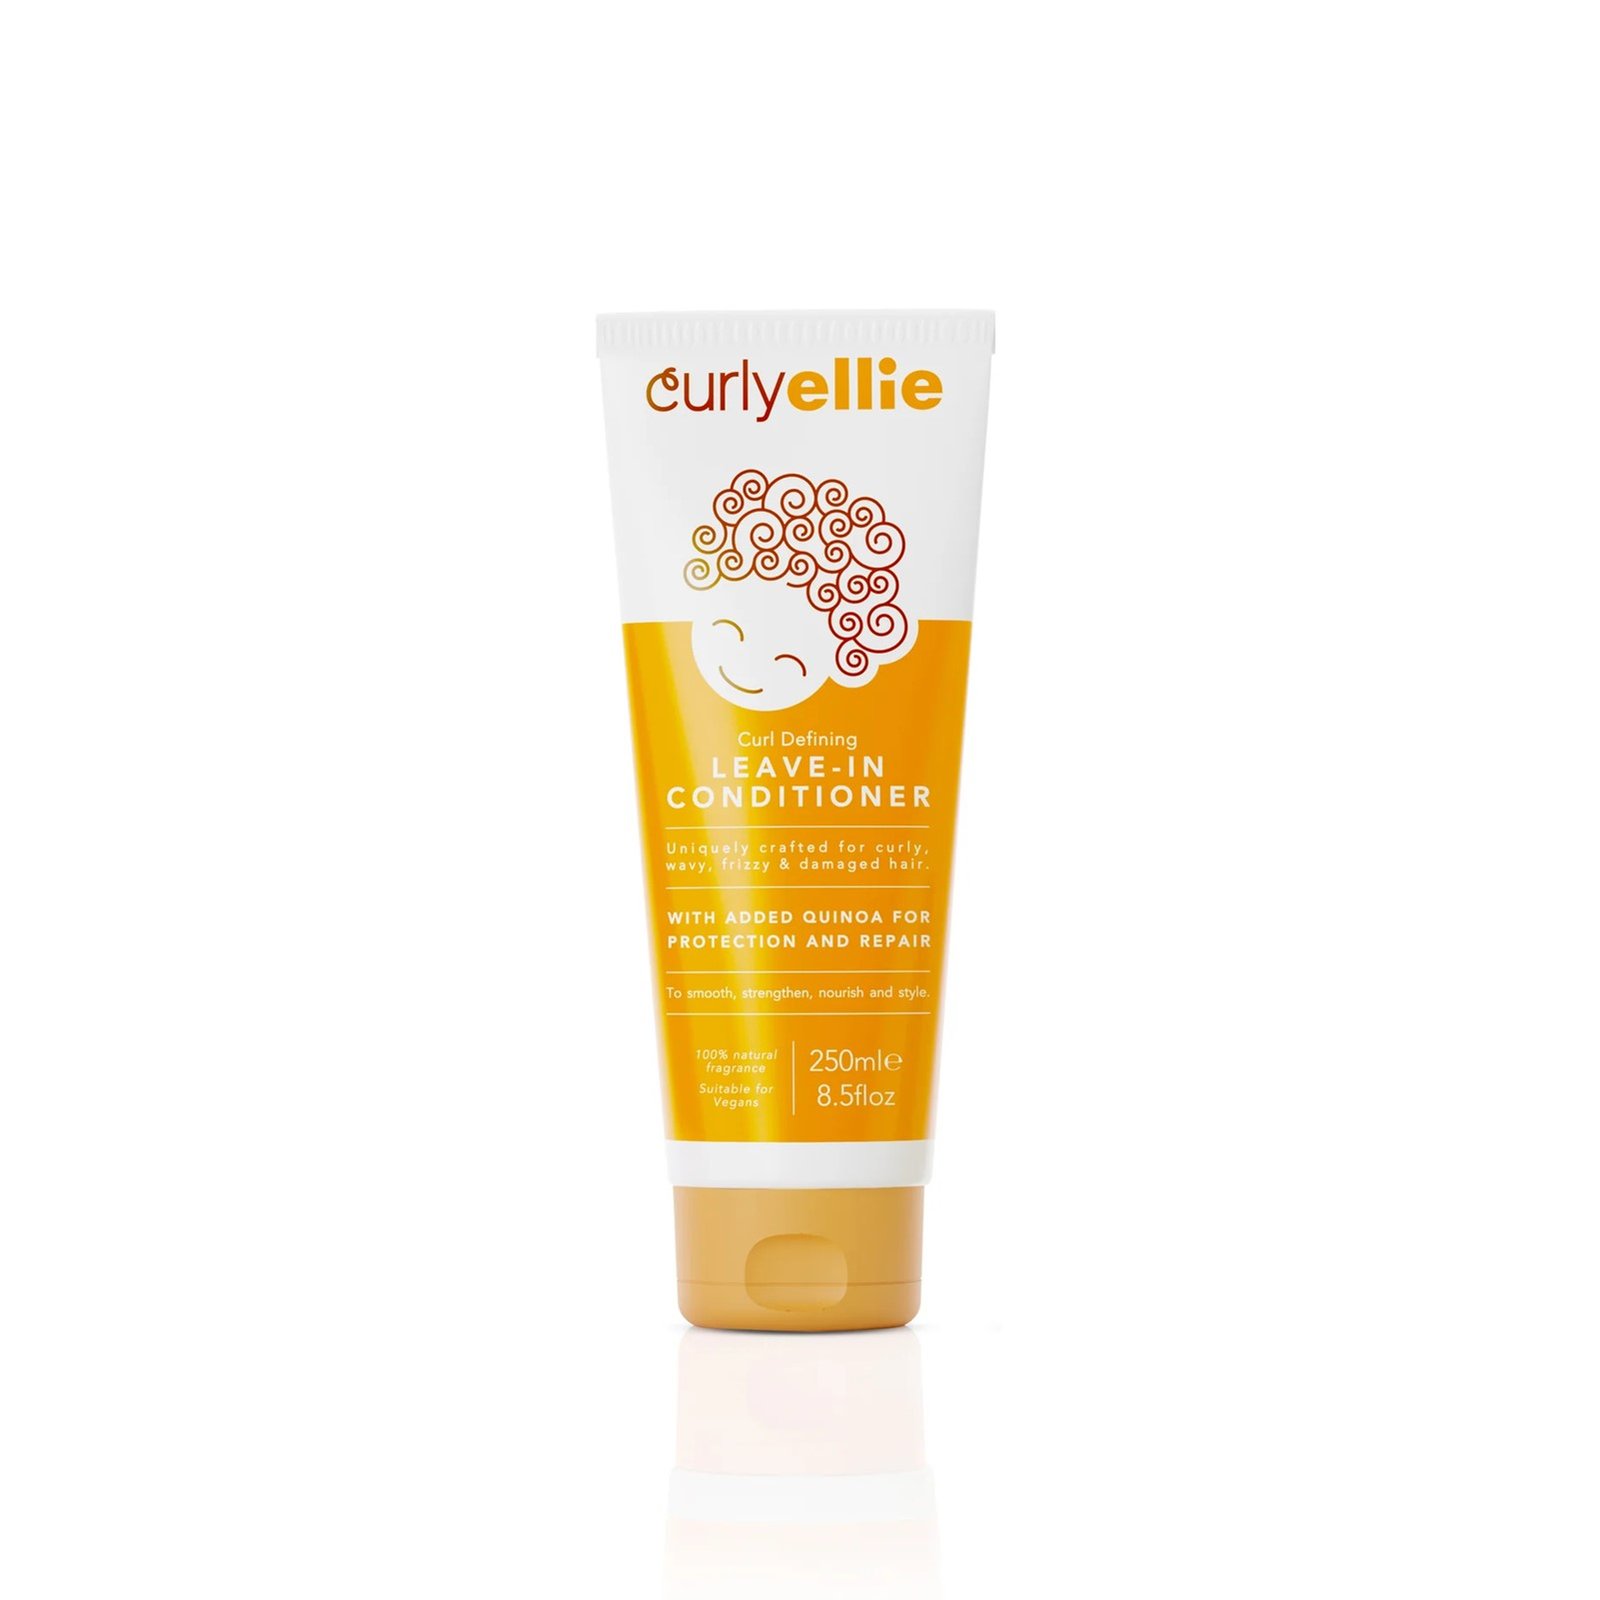 CurlyEllie Curl Defining Leave-in Conditioner 250ml (8.5 fl oz)